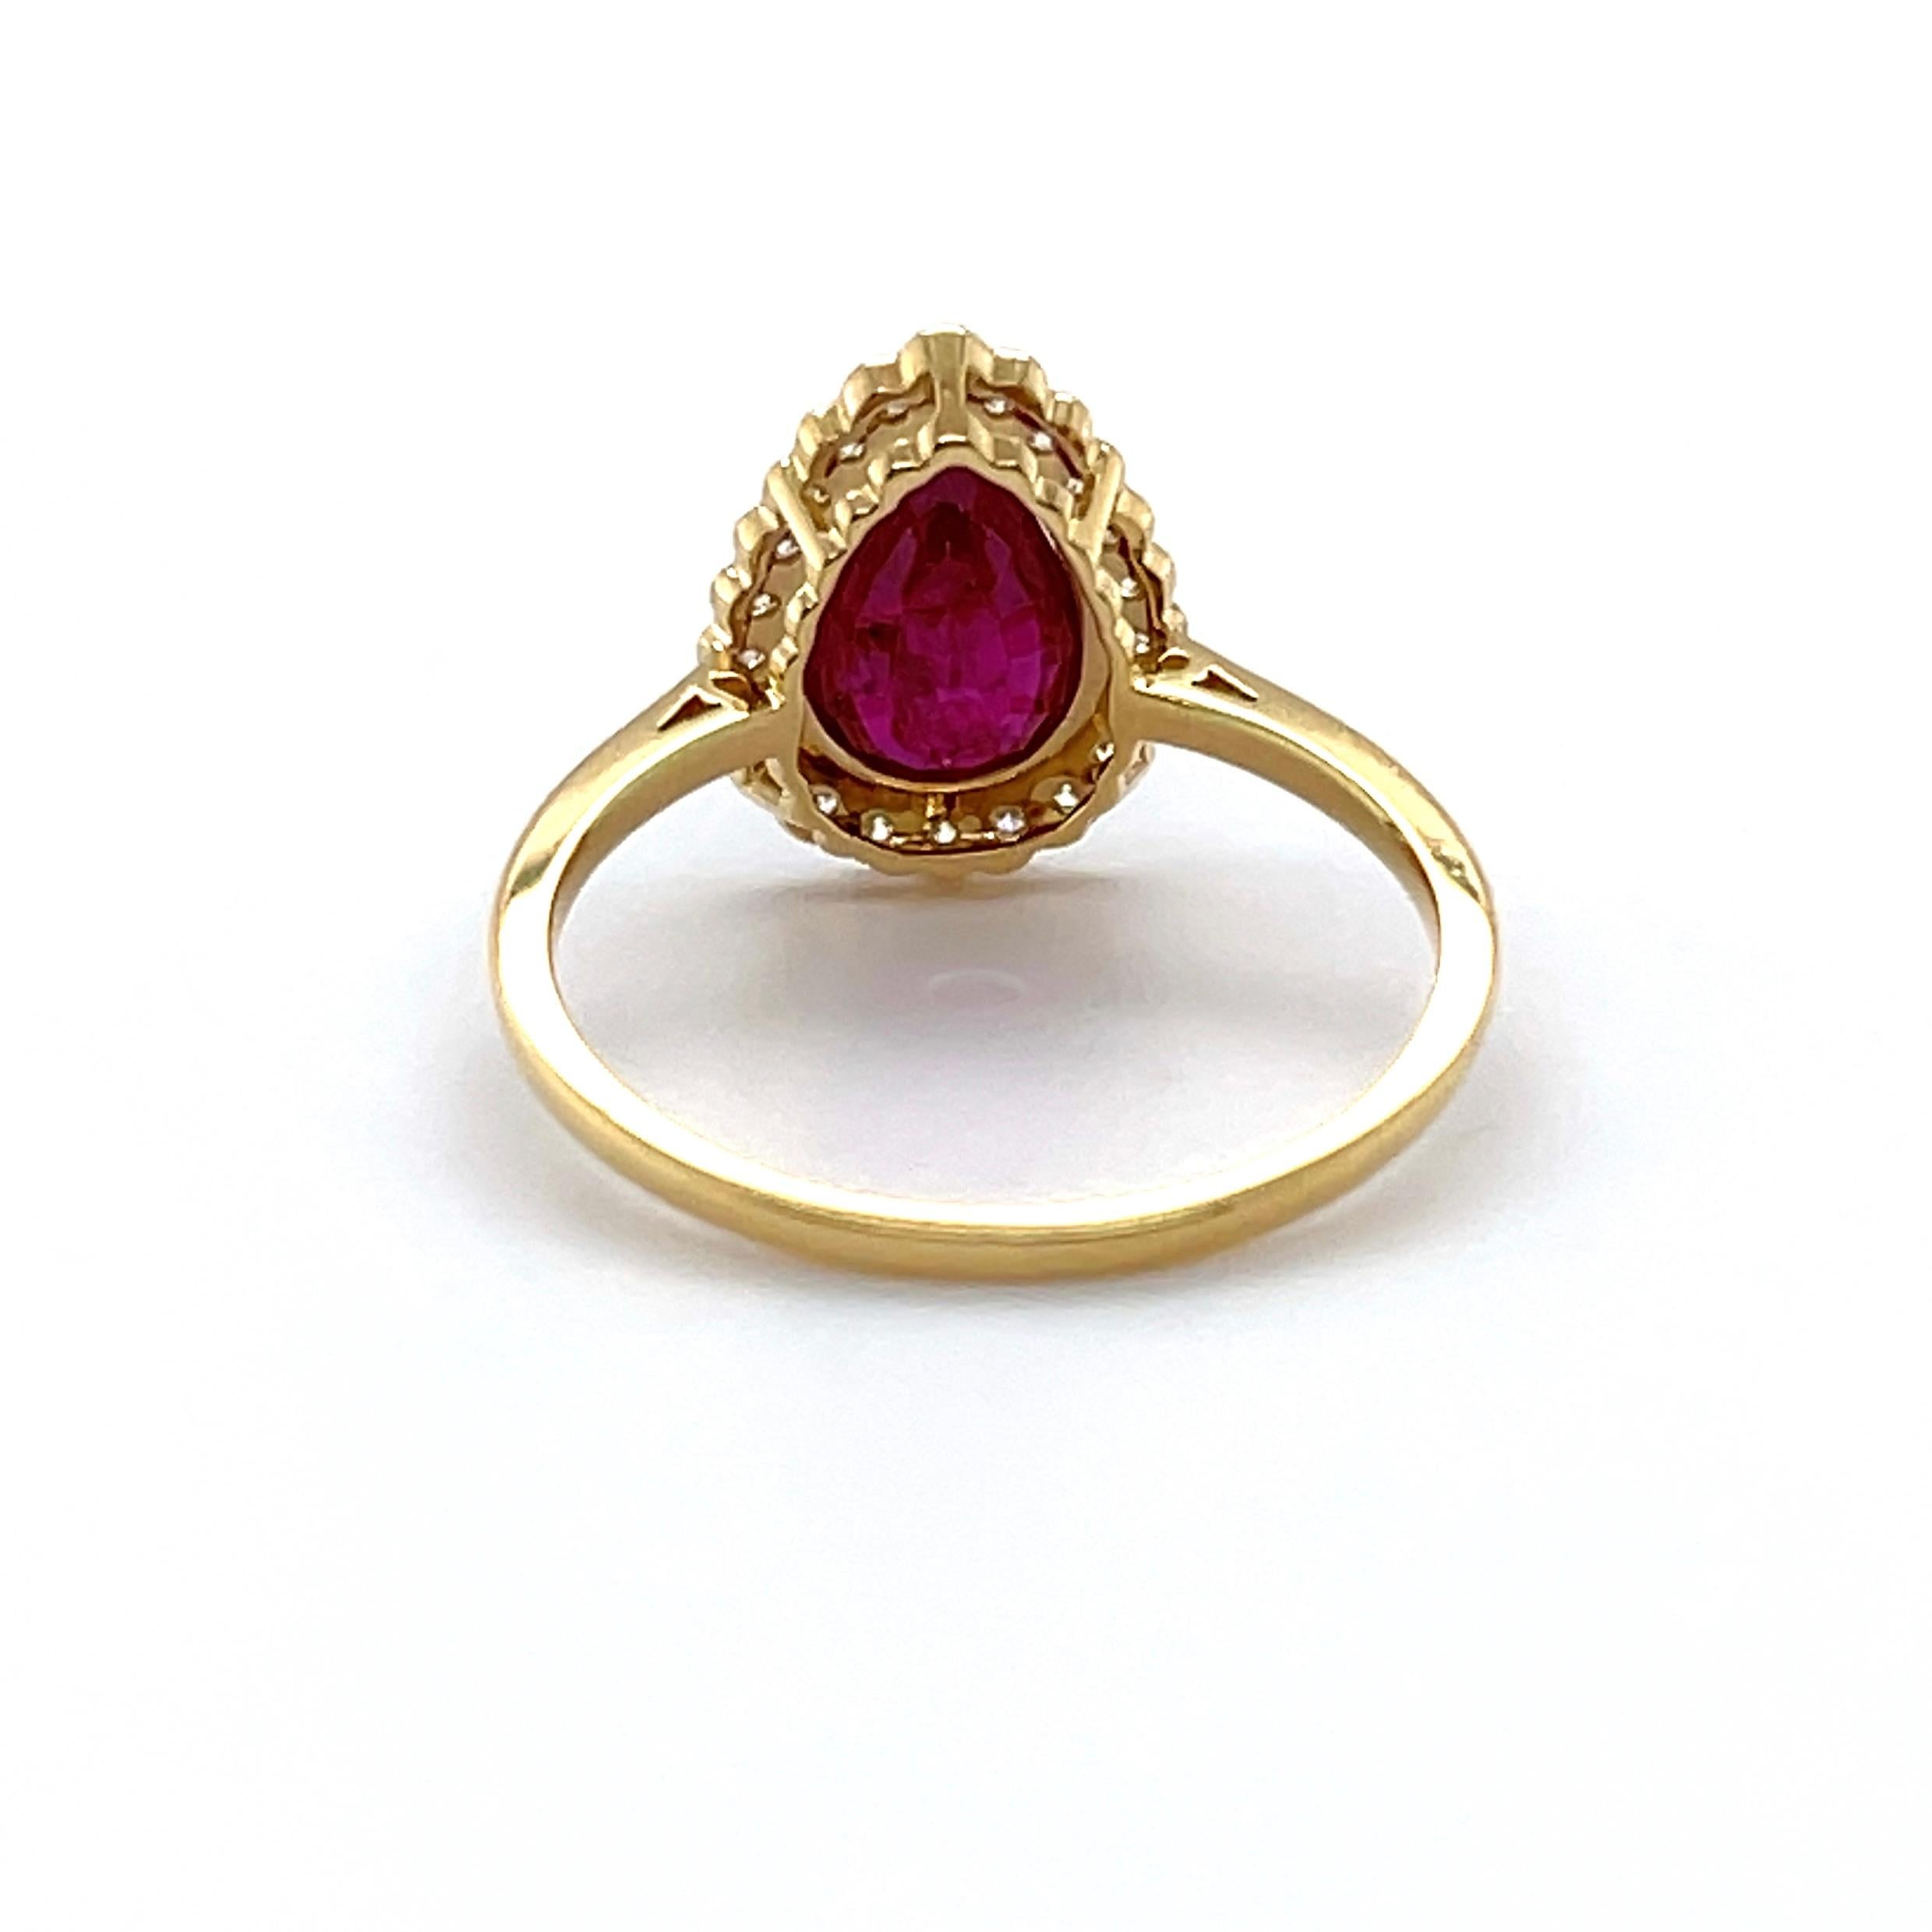 For Sale:  18ct Yellow Gold Ring with 'No Heat' 1.43ct Ruby and Diamond 4